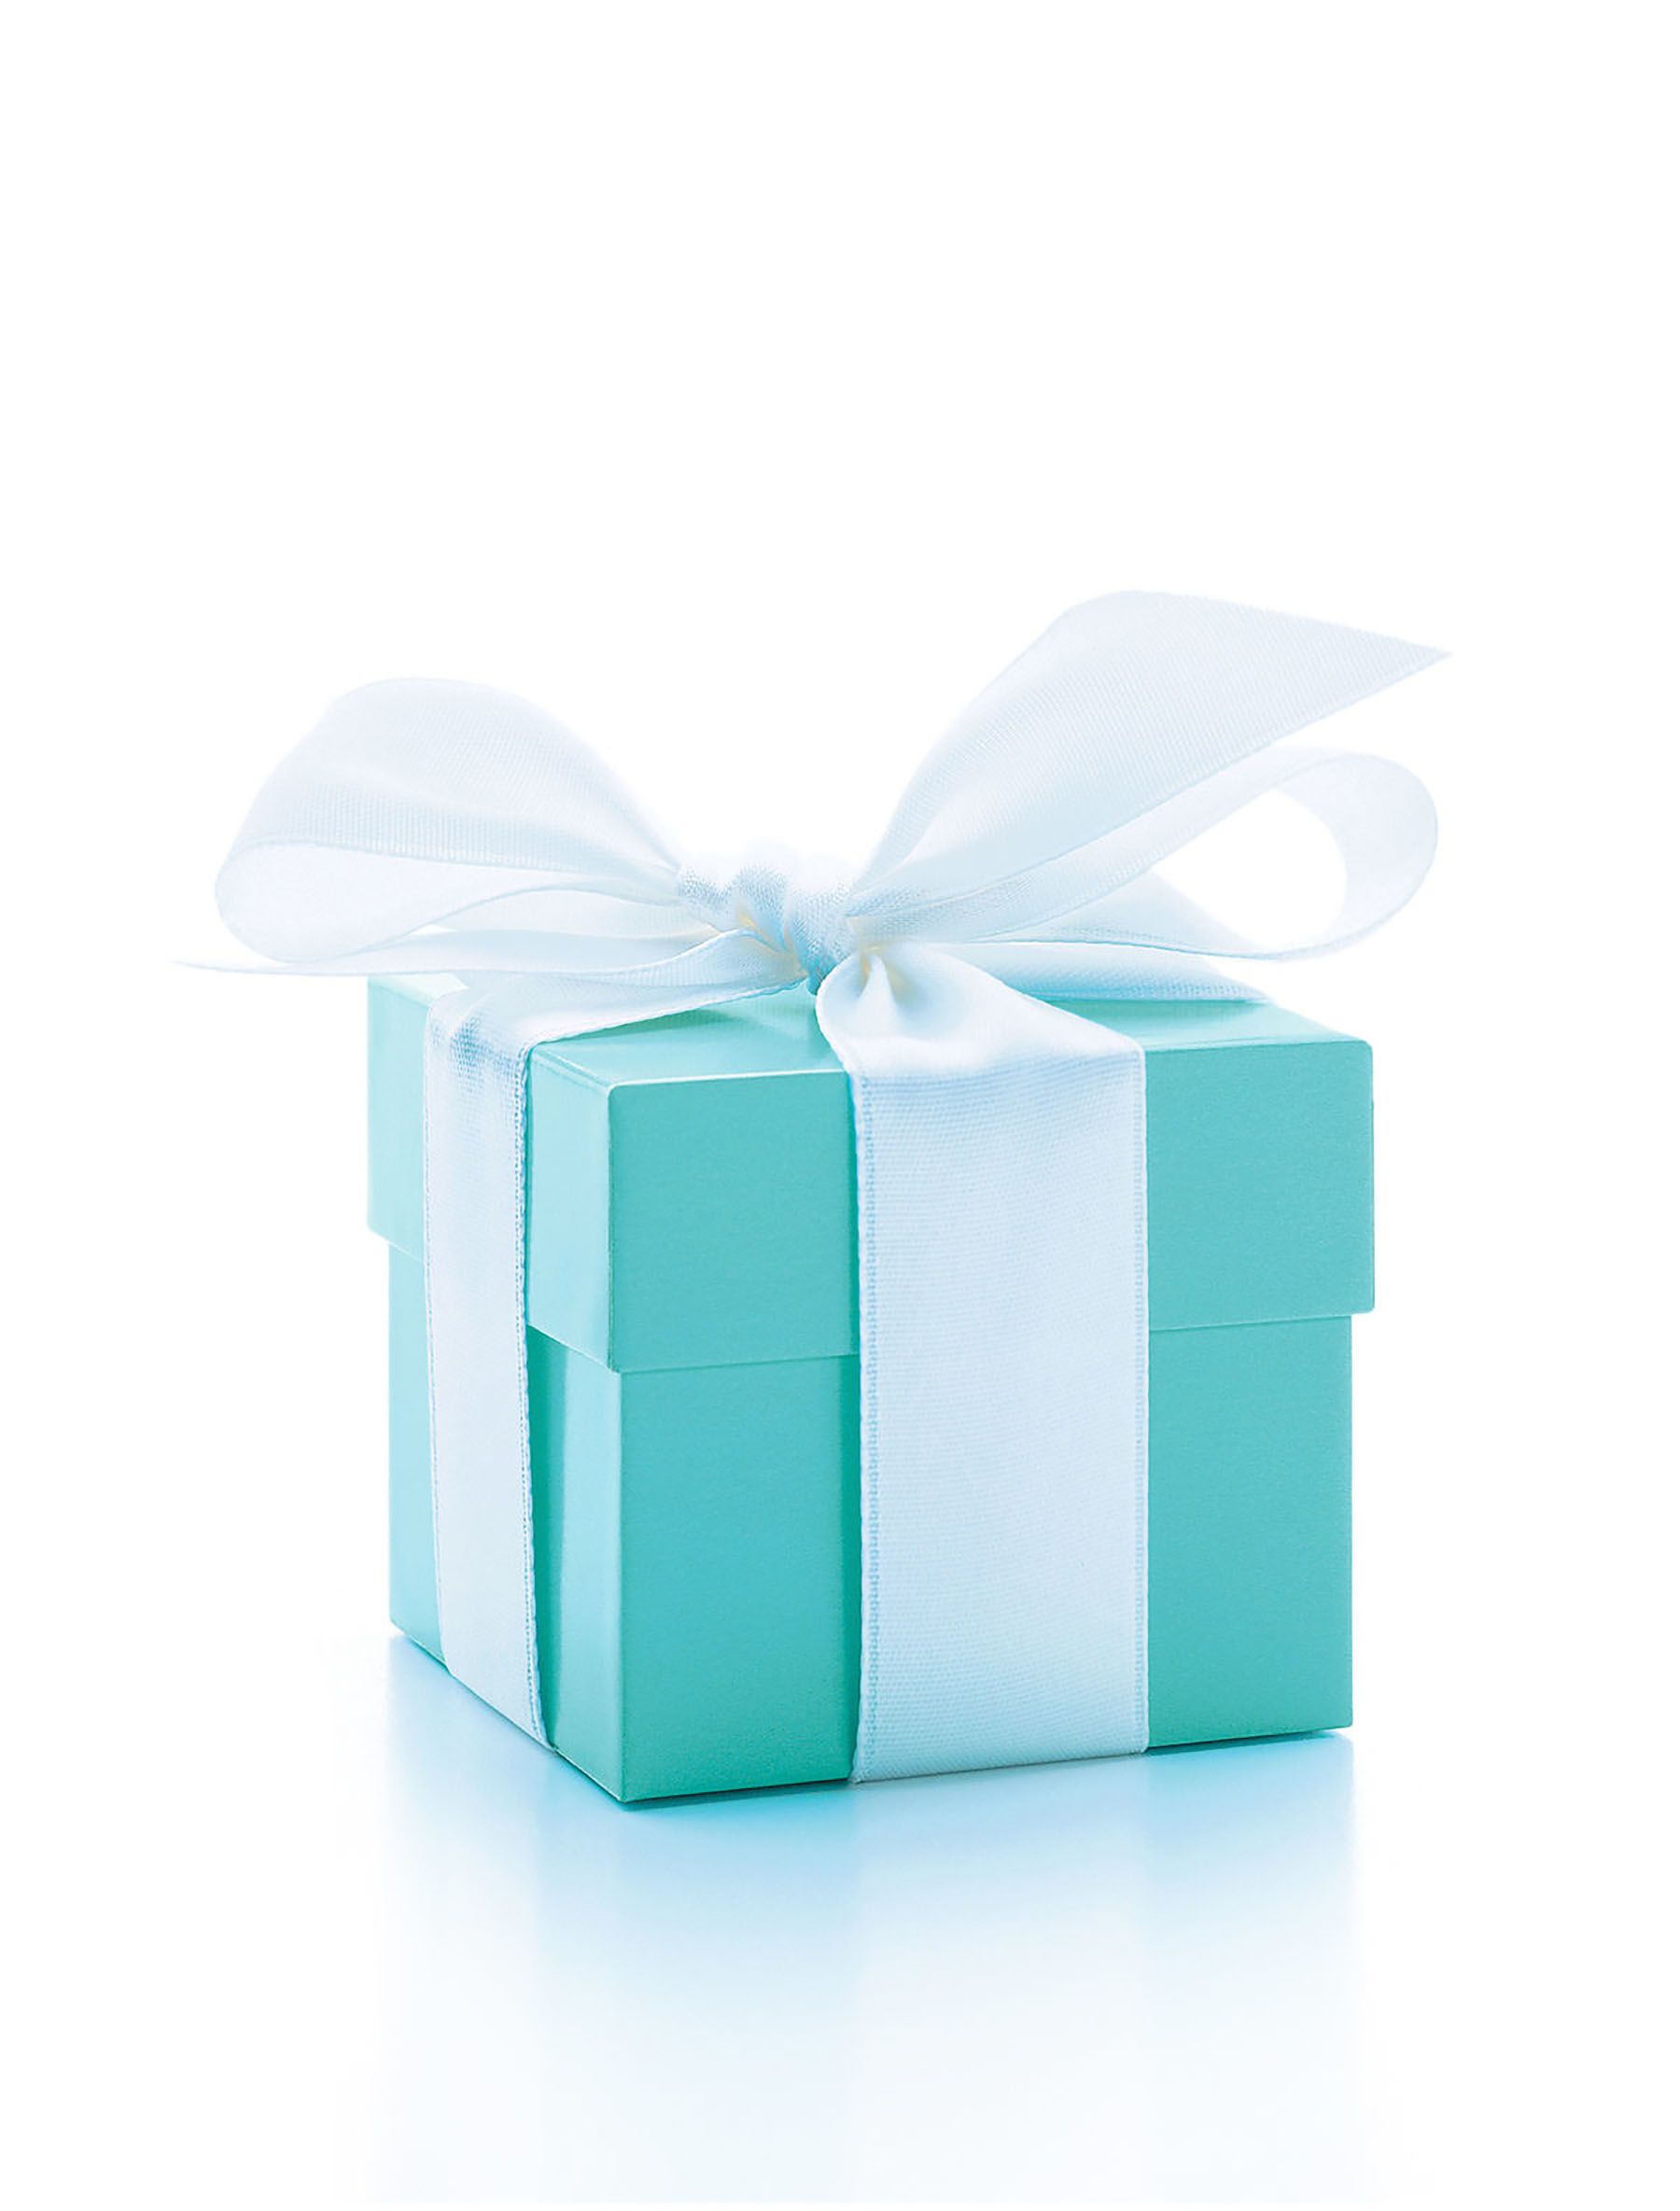 Tiffany: LVMH & Tiffany make up, seal the deal for $15.8 bn - The